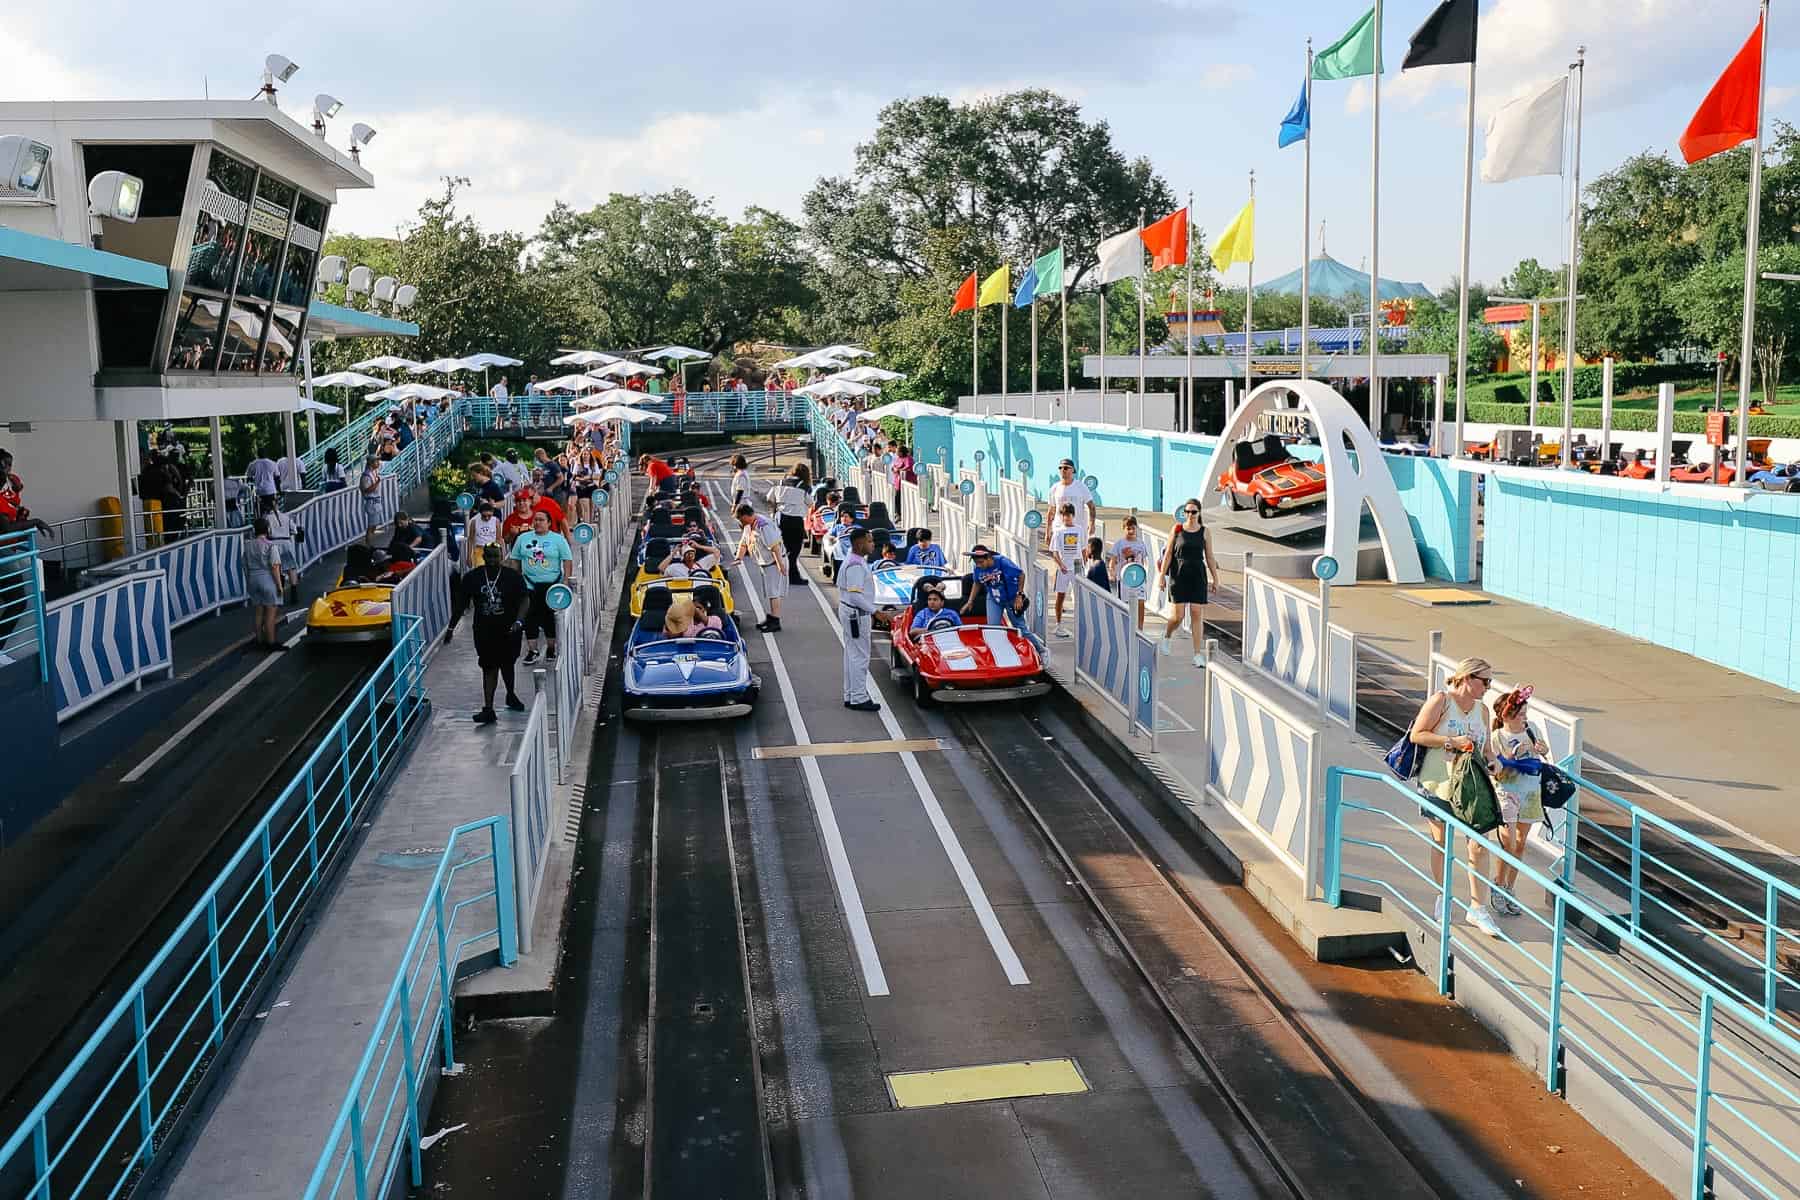 Standing on the bridge as a spectator watching guests come through on their cars. 